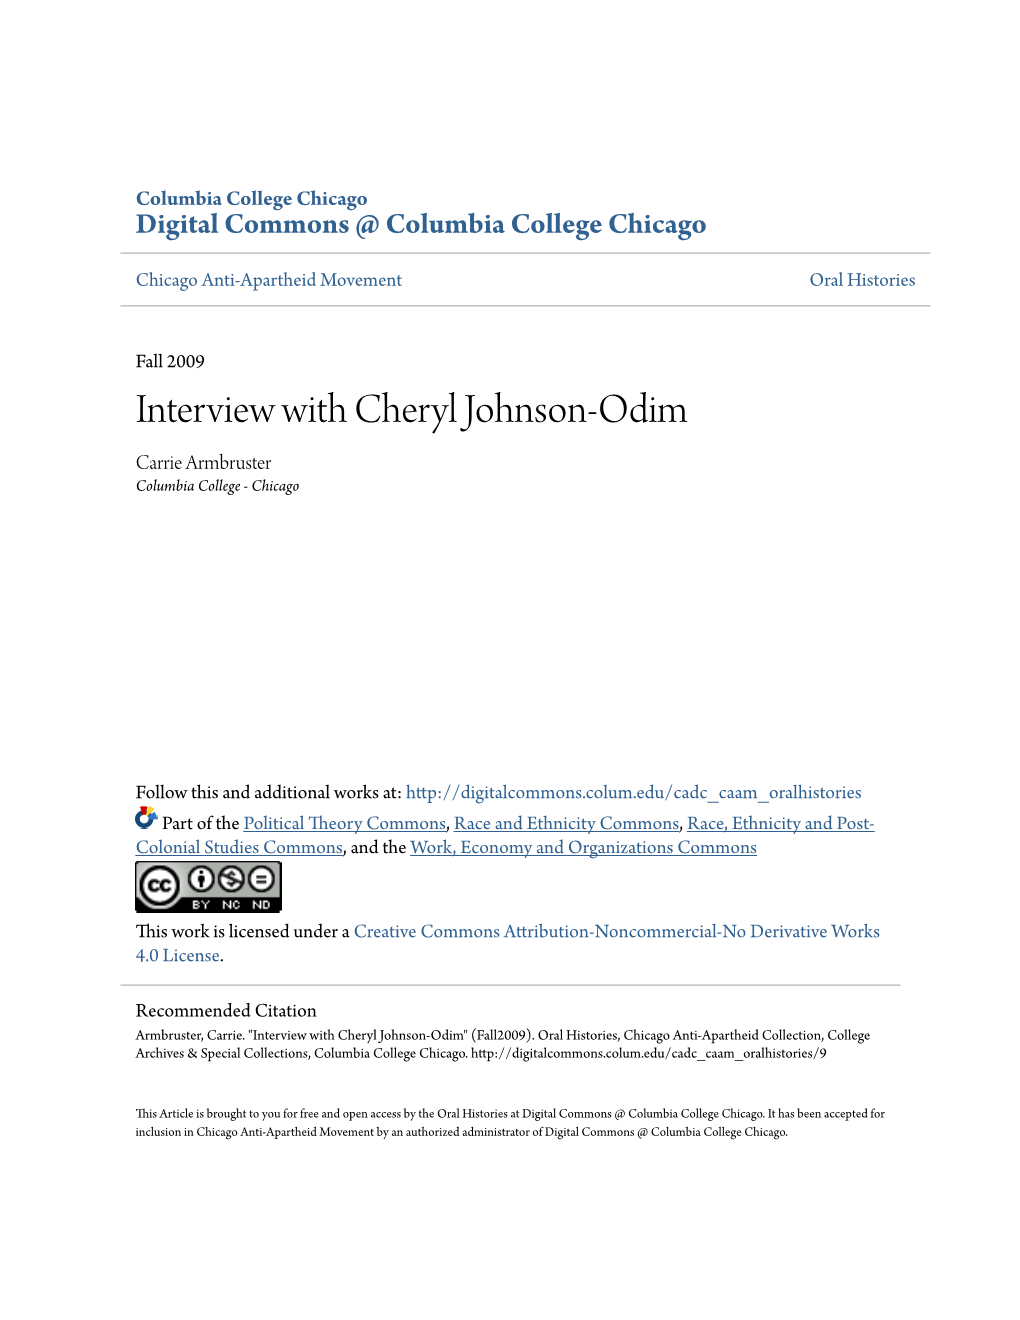 Interview with Cheryl Johnson-Odim Carrie Armbruster Columbia College - Chicago